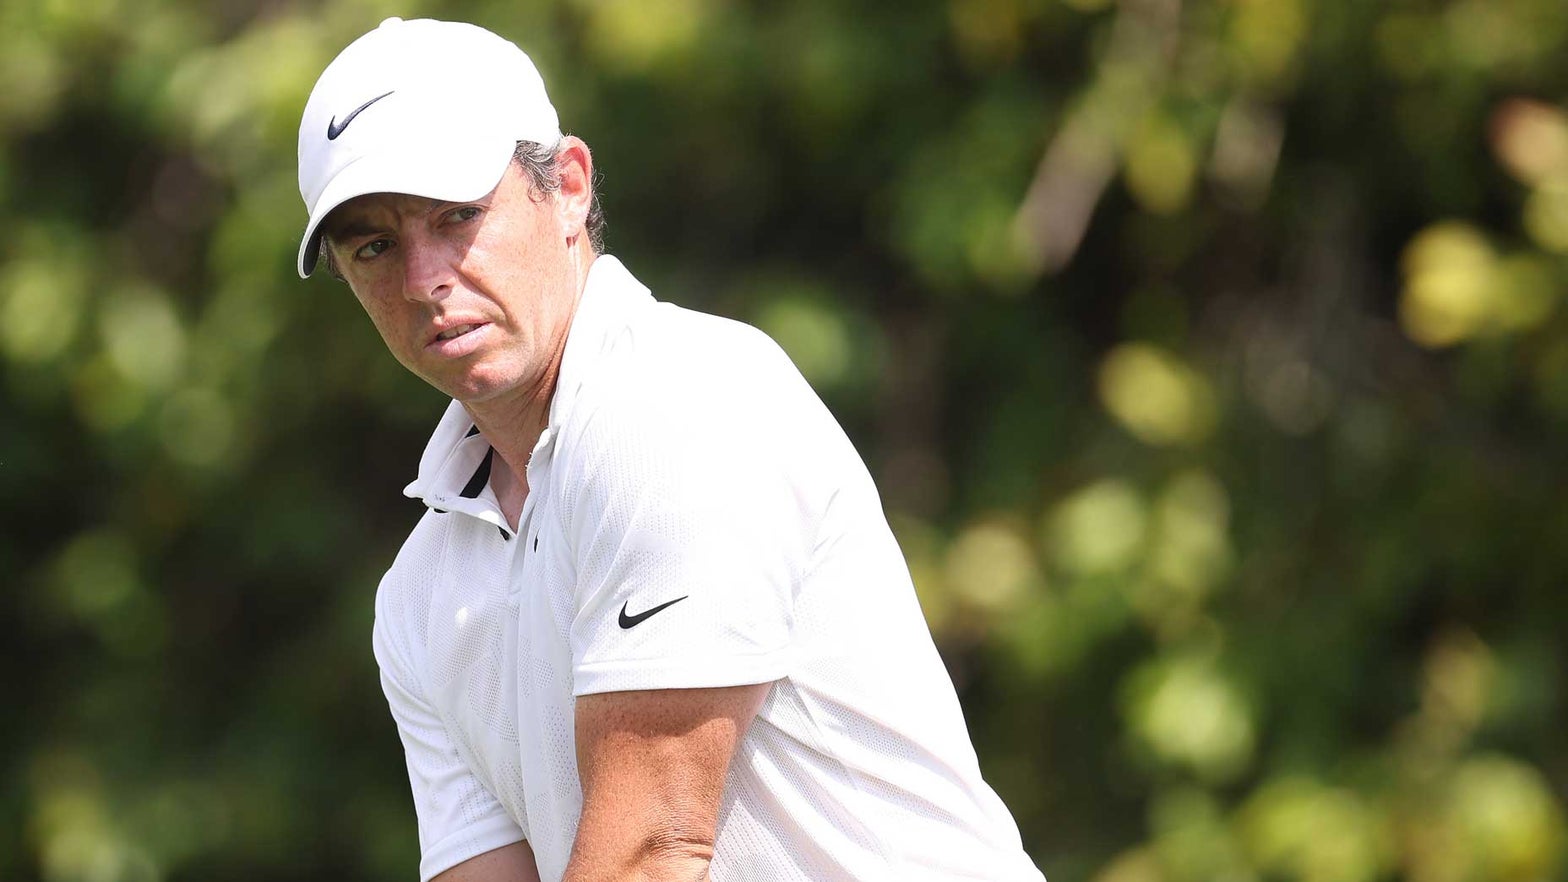 Rory McIlroy has an intriguing concept for future PGA Tour occasions